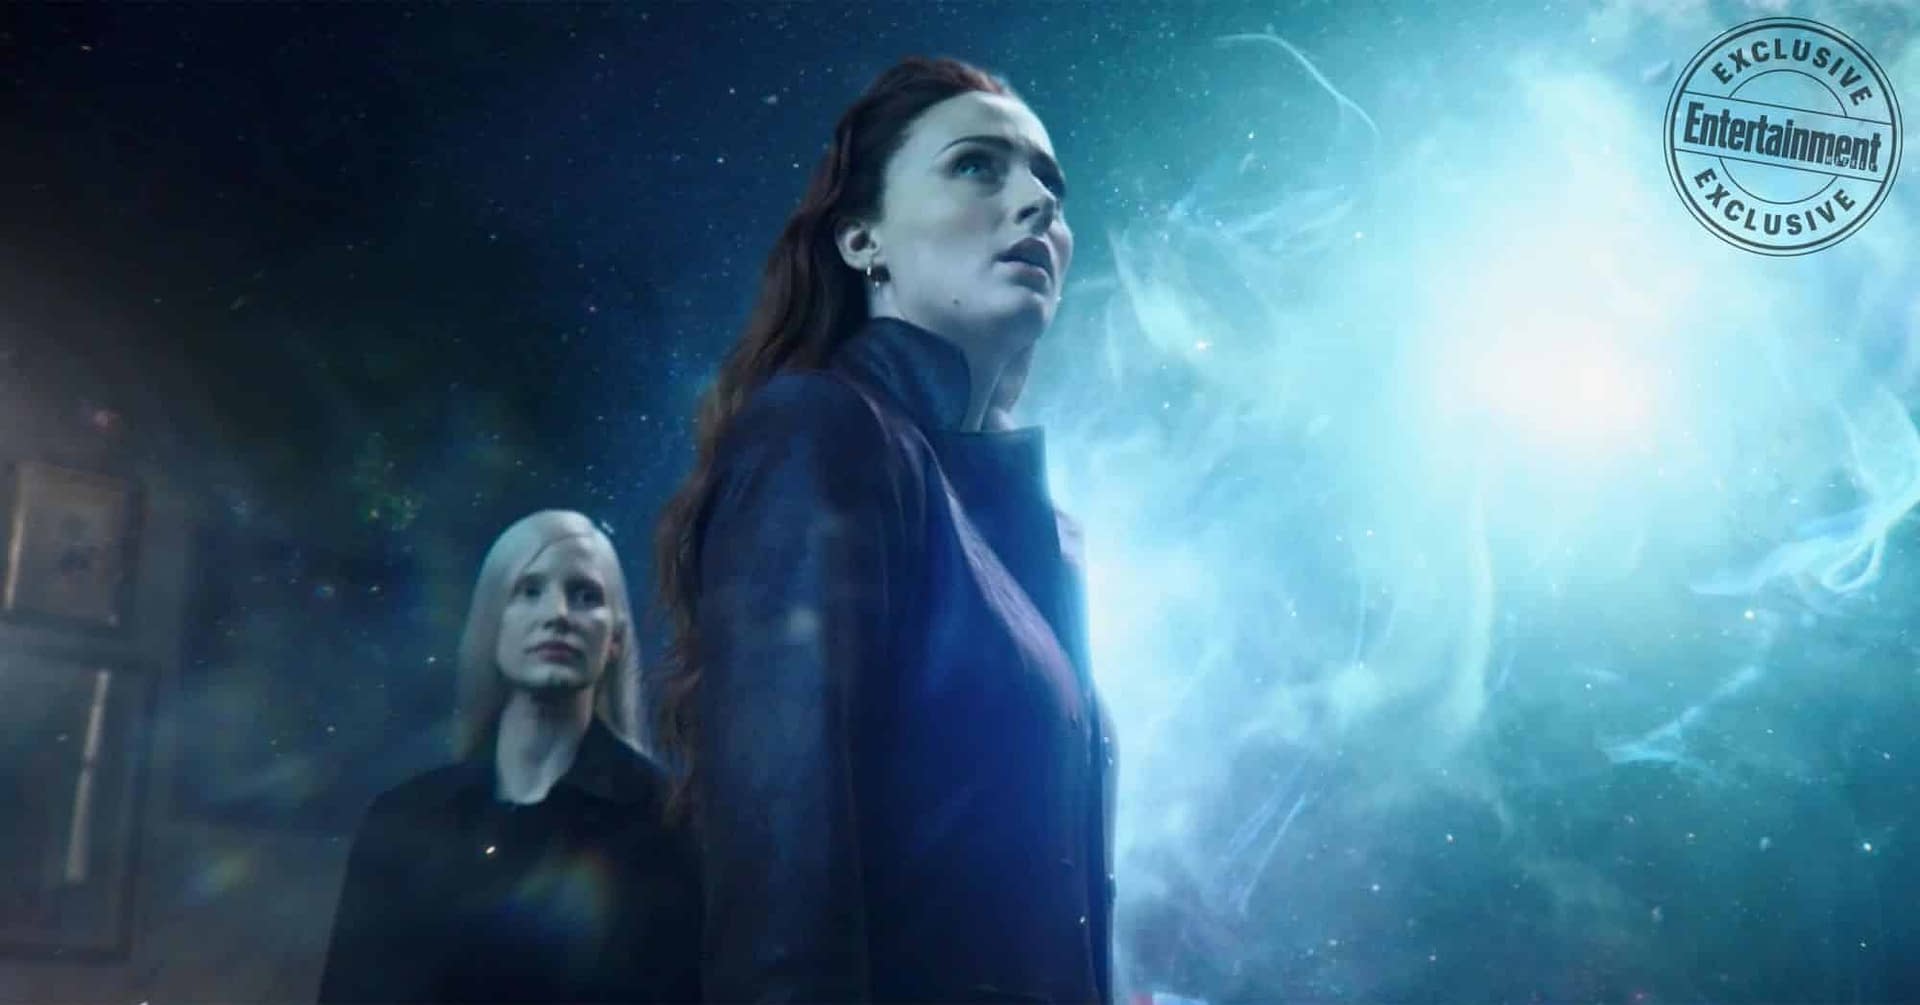 Jean Grey Looks Ready to Take on the World in These New Dark Phoenix Images